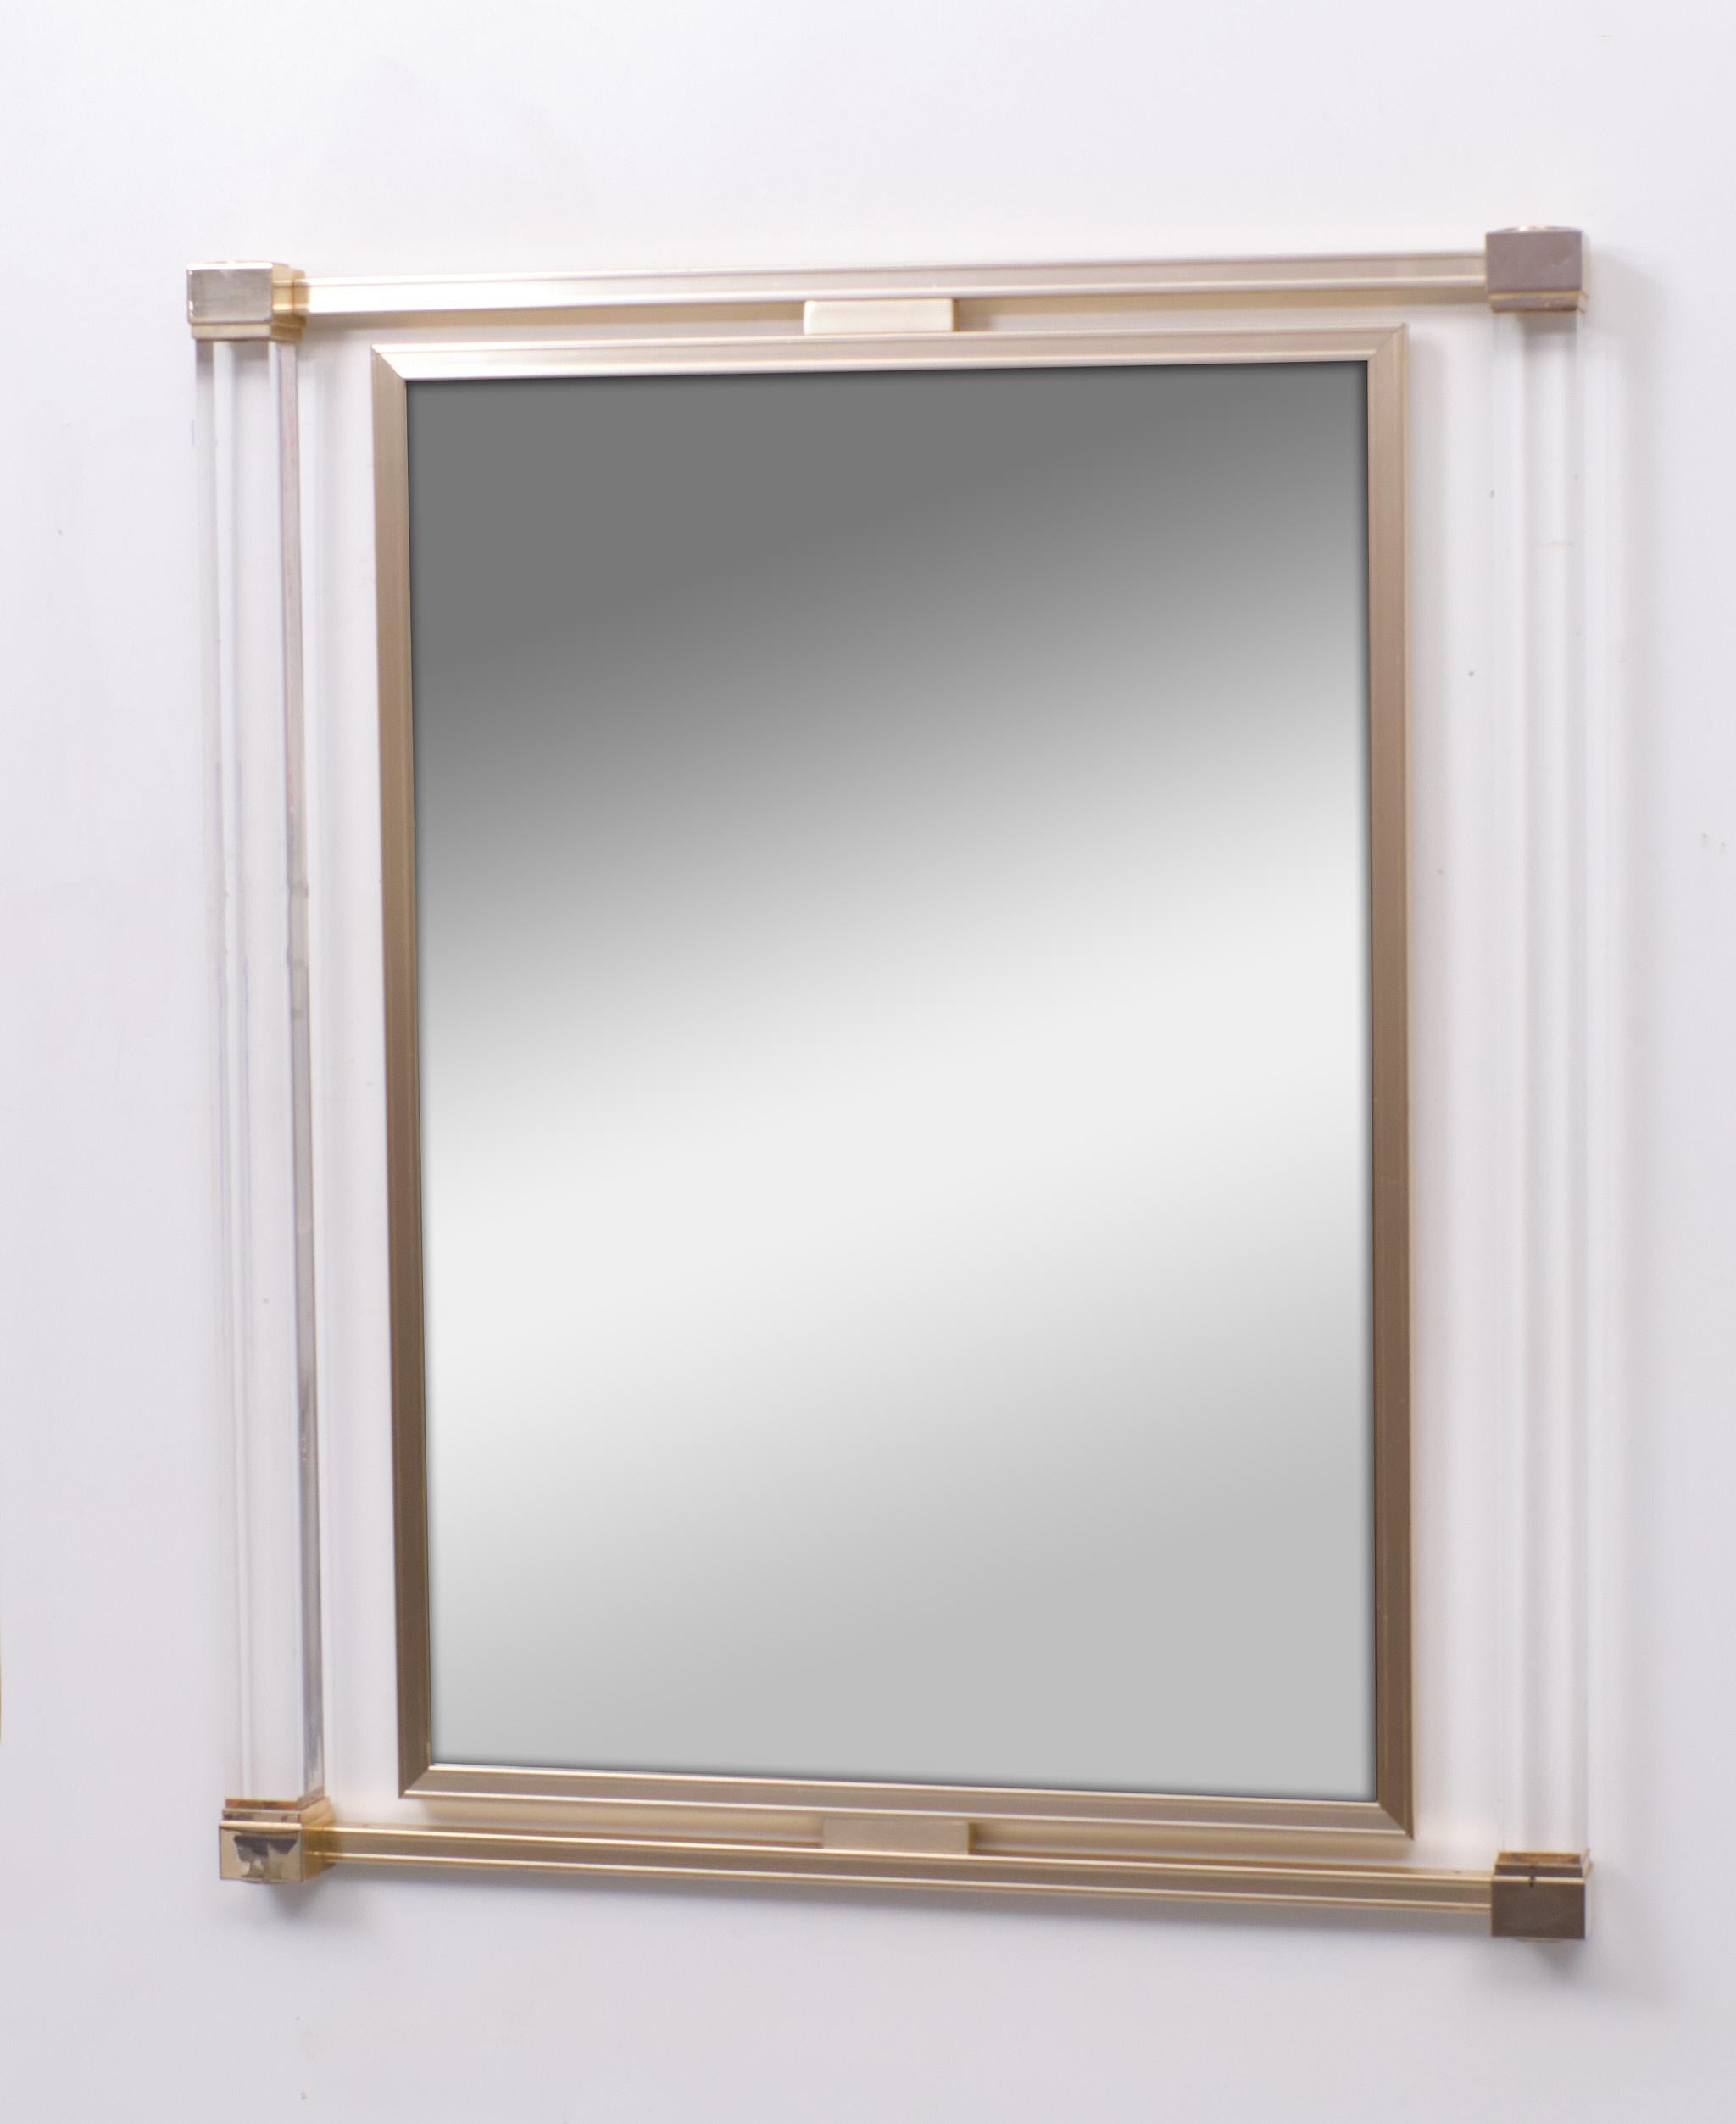 Very nice rare Pierre Vandel  Paris  Wall Mirror . Lucite square columns with .Brass fittings . The mirror fitted in a  Rose Gold Aluminum frame ..
Good condition . Design by Pierre Vandel  Paris 1970s            

Please don't hesitate to reach out